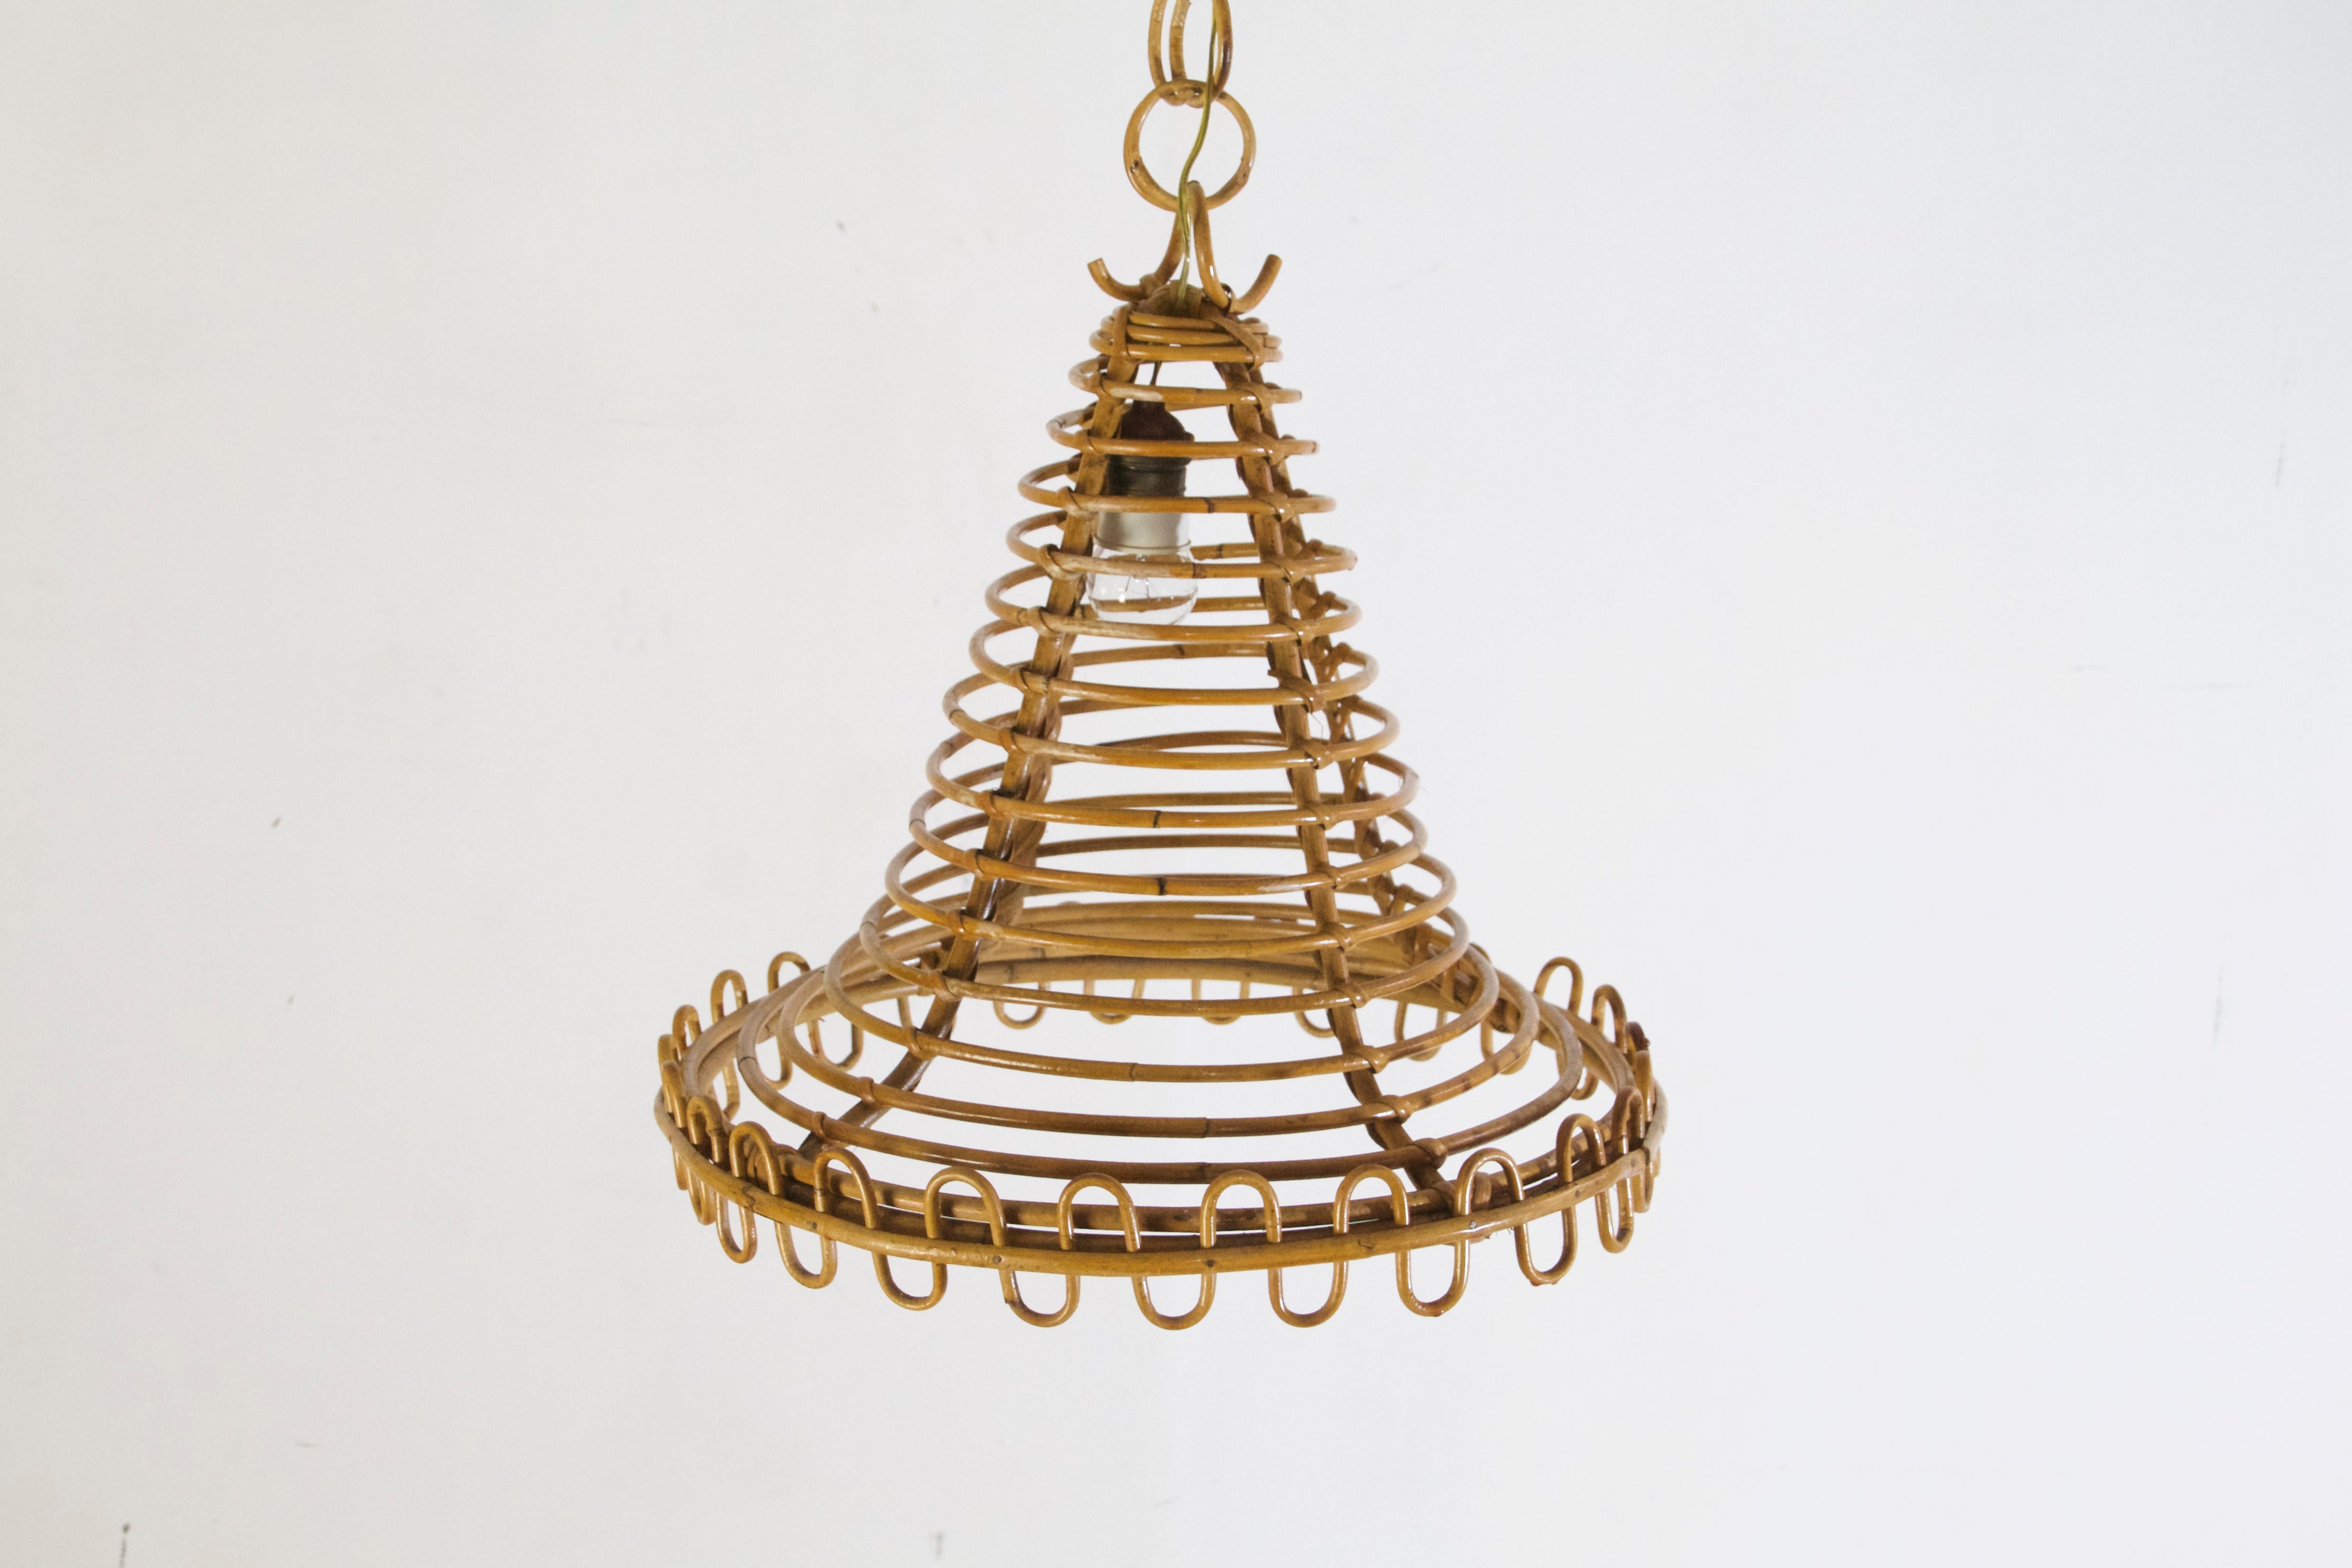 Midcentury Italian handmade rattan pendant in very nice original condition without damages and in very nice condition. Lightsource can be altered depending on what one prefers of course. Measures: Height of the shade is 42cm and with chain 110cm.